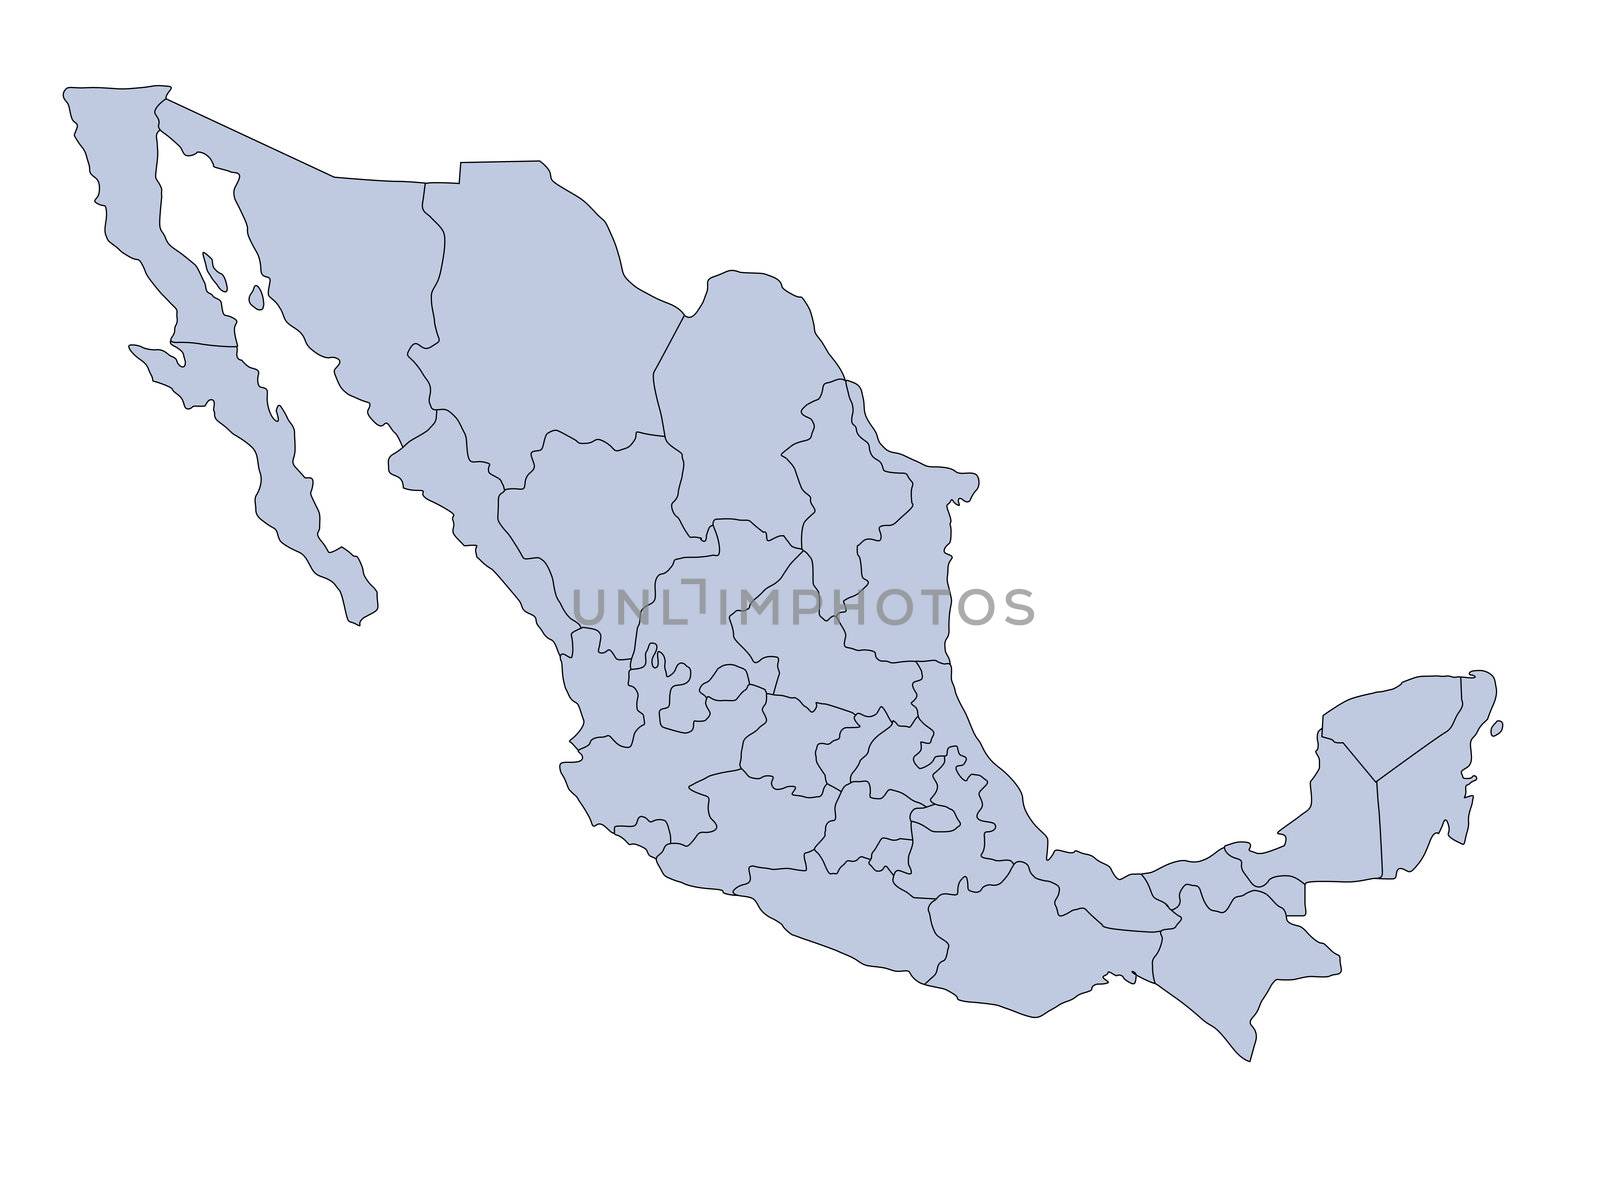 Map Of Mexico by kaarsten